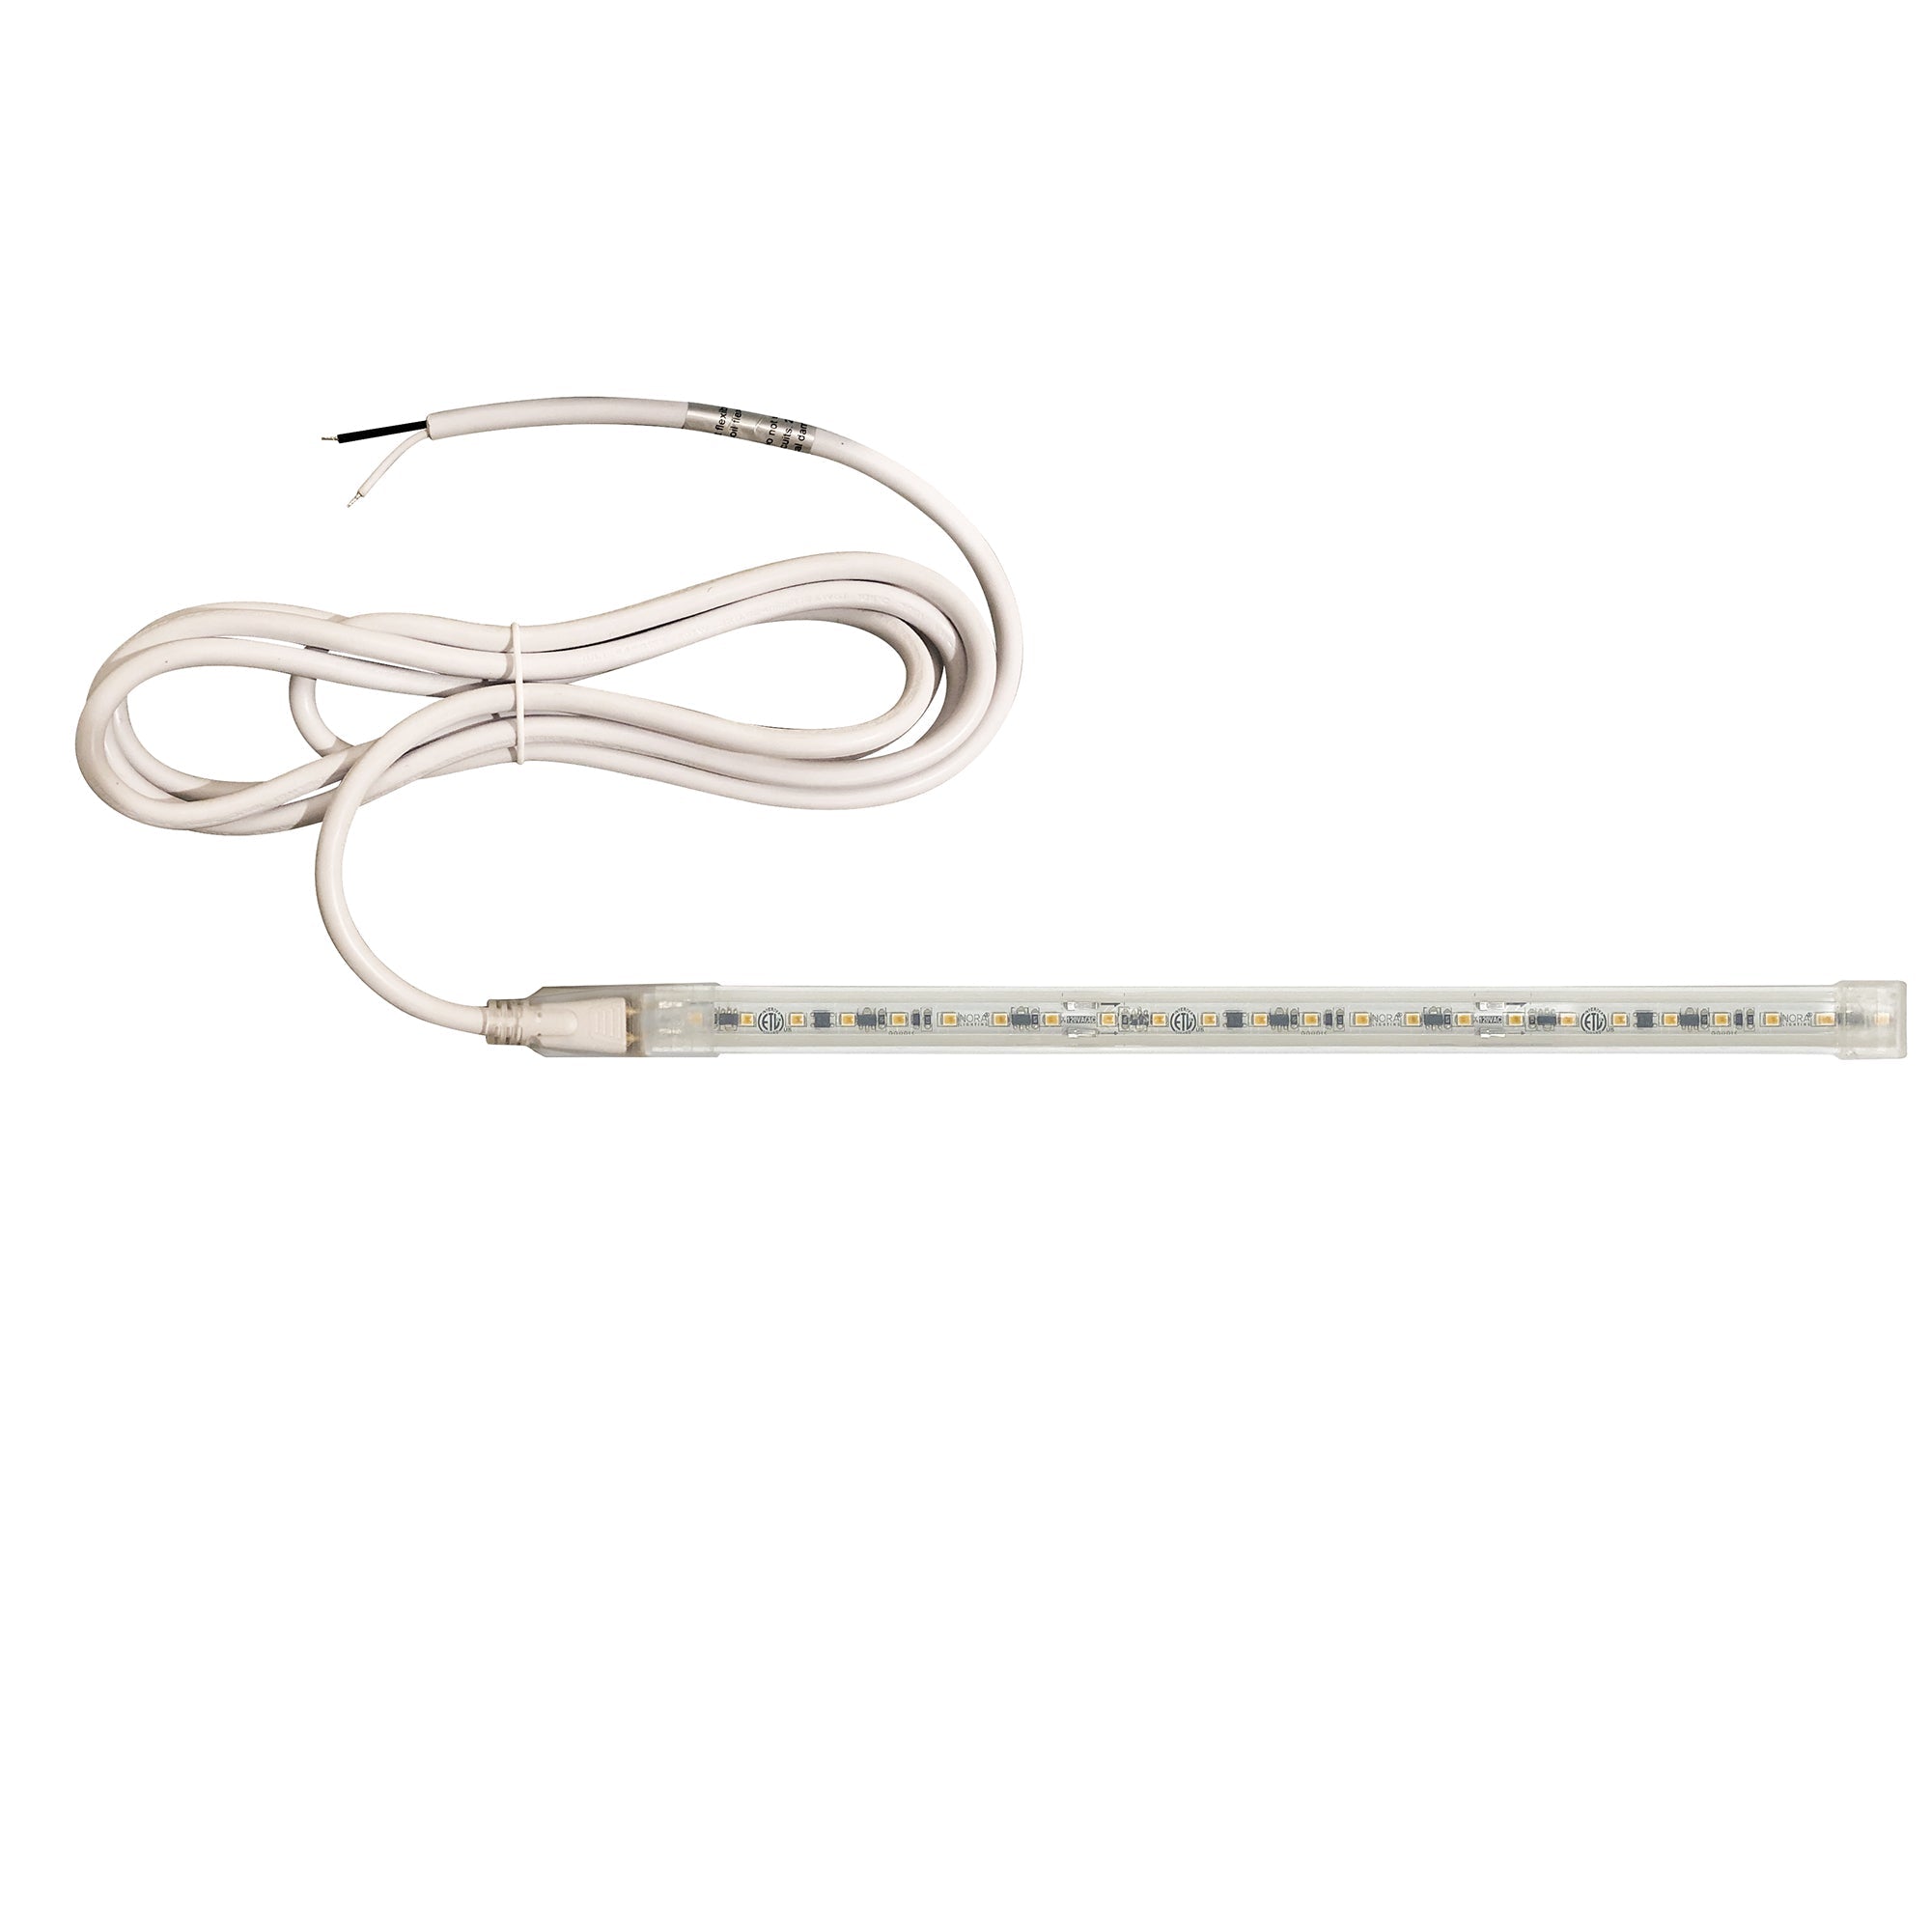 Nora Lighting NUTP13-W51-12-930/HW - Accent / Undercabinet - Custom Cut 51-ft 120V Continuous LED Tape Light, 330lm / 3.6W per foot, 3000K, w/ Mounting Clips and 8' Hardwired Power Cord